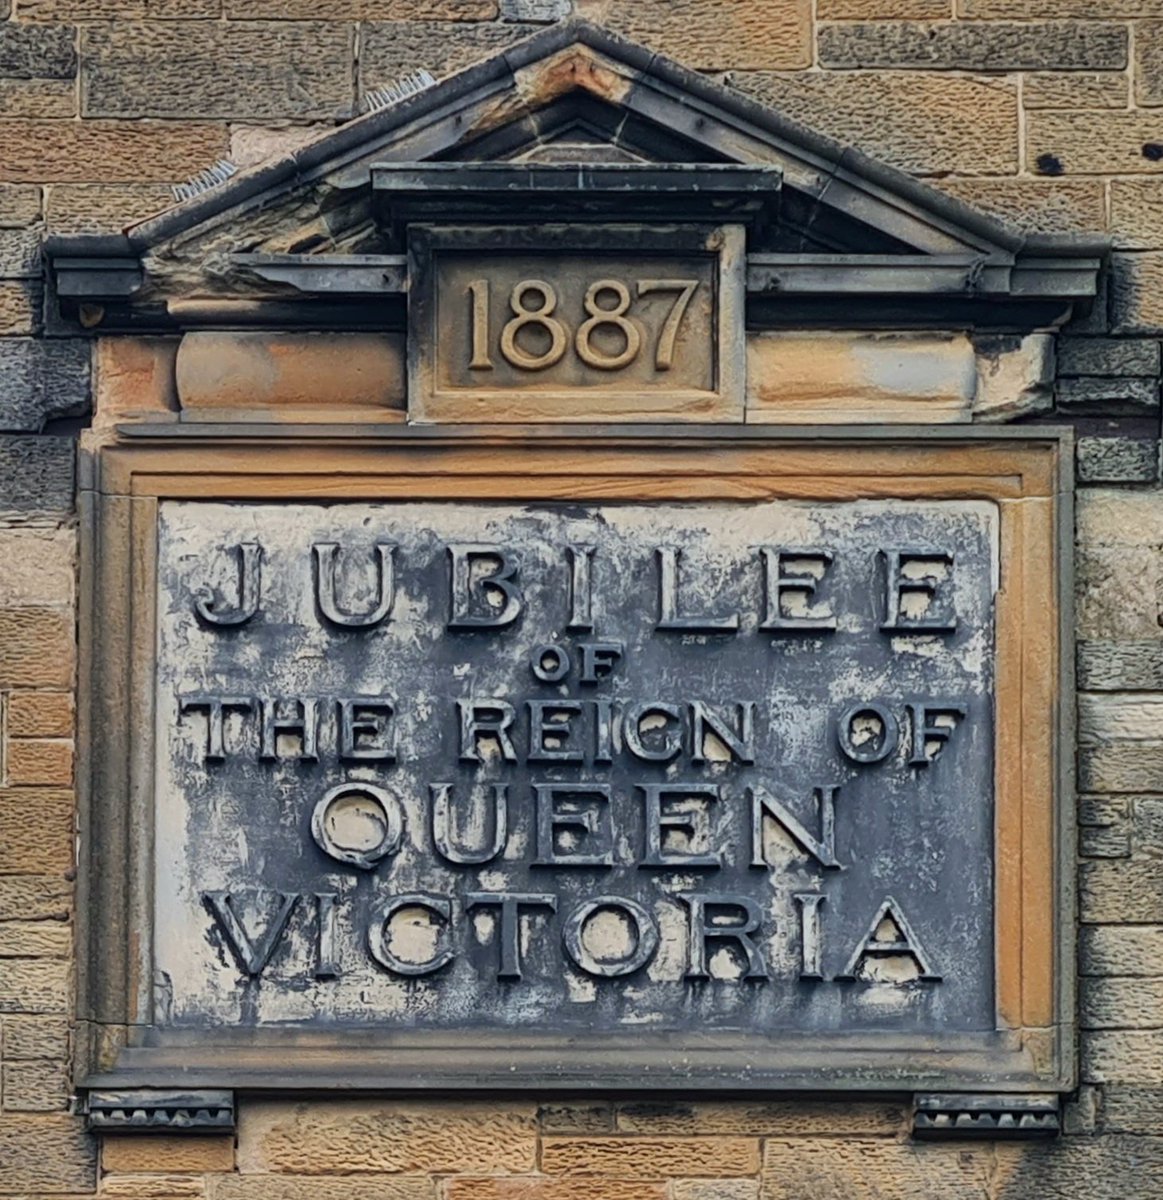 Queen Victoria 1887 Jubilee plaque on the side of the former Kelvinhaugh Primary School on Sandyford Street in the West of Glasgow. #glasgow #architecture #glasgowbuildings #oldschool #kelvinhaugh #plaque #queenvictoria